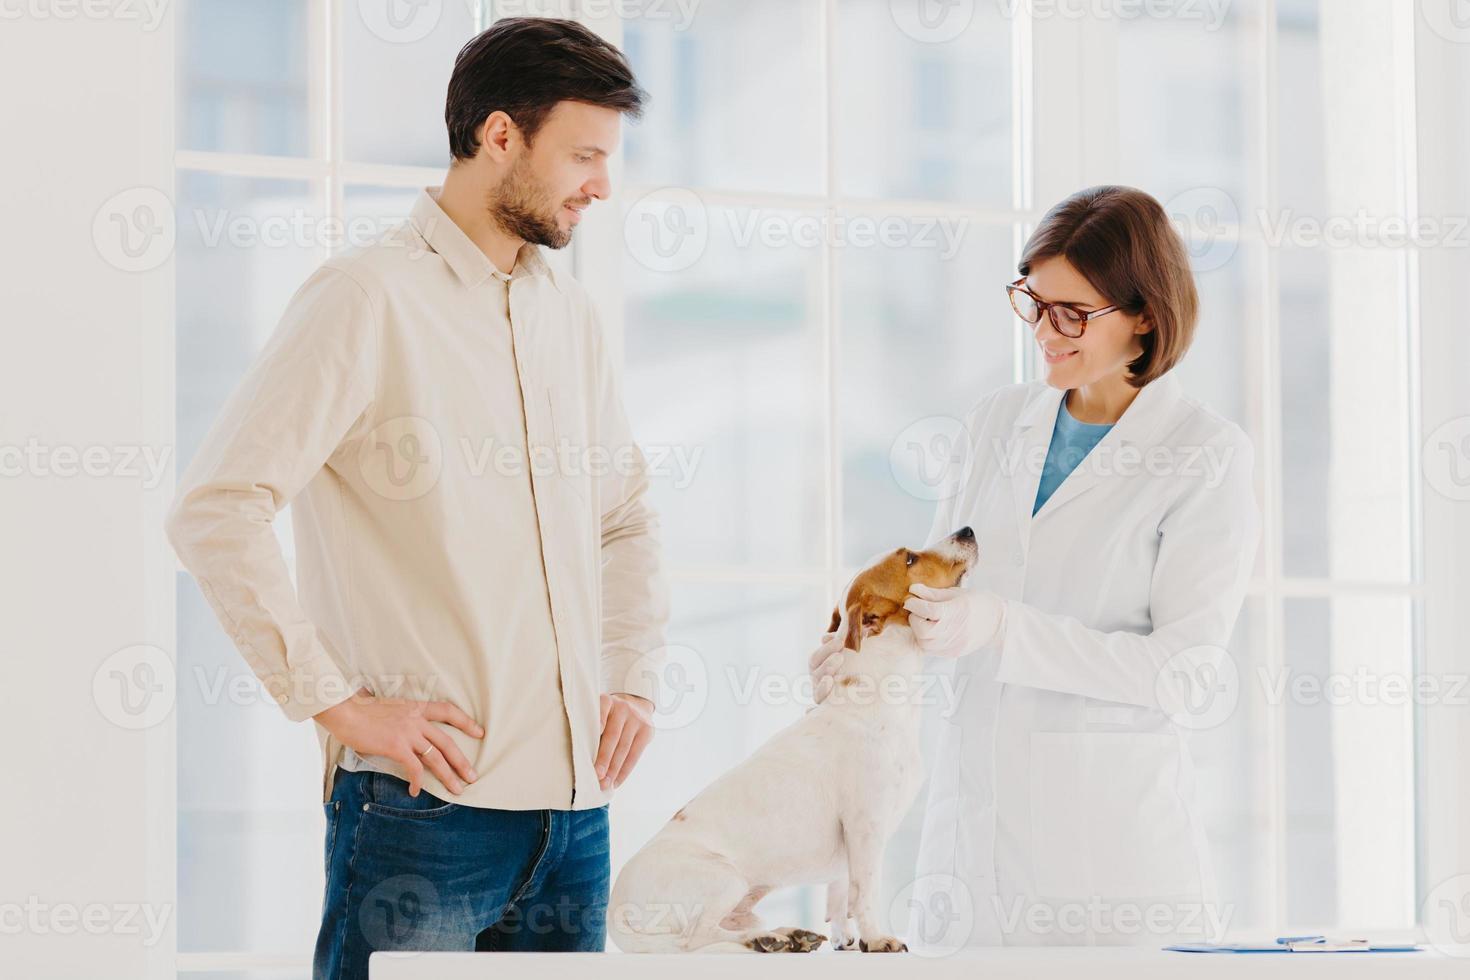 Medicine and pet care concept. Woman veterinarian wears white gown, spectalces, medic gloves, examines jack russell terrier, visit vet clinic. Man owner of ill dog gets consultancy of professional vet photo